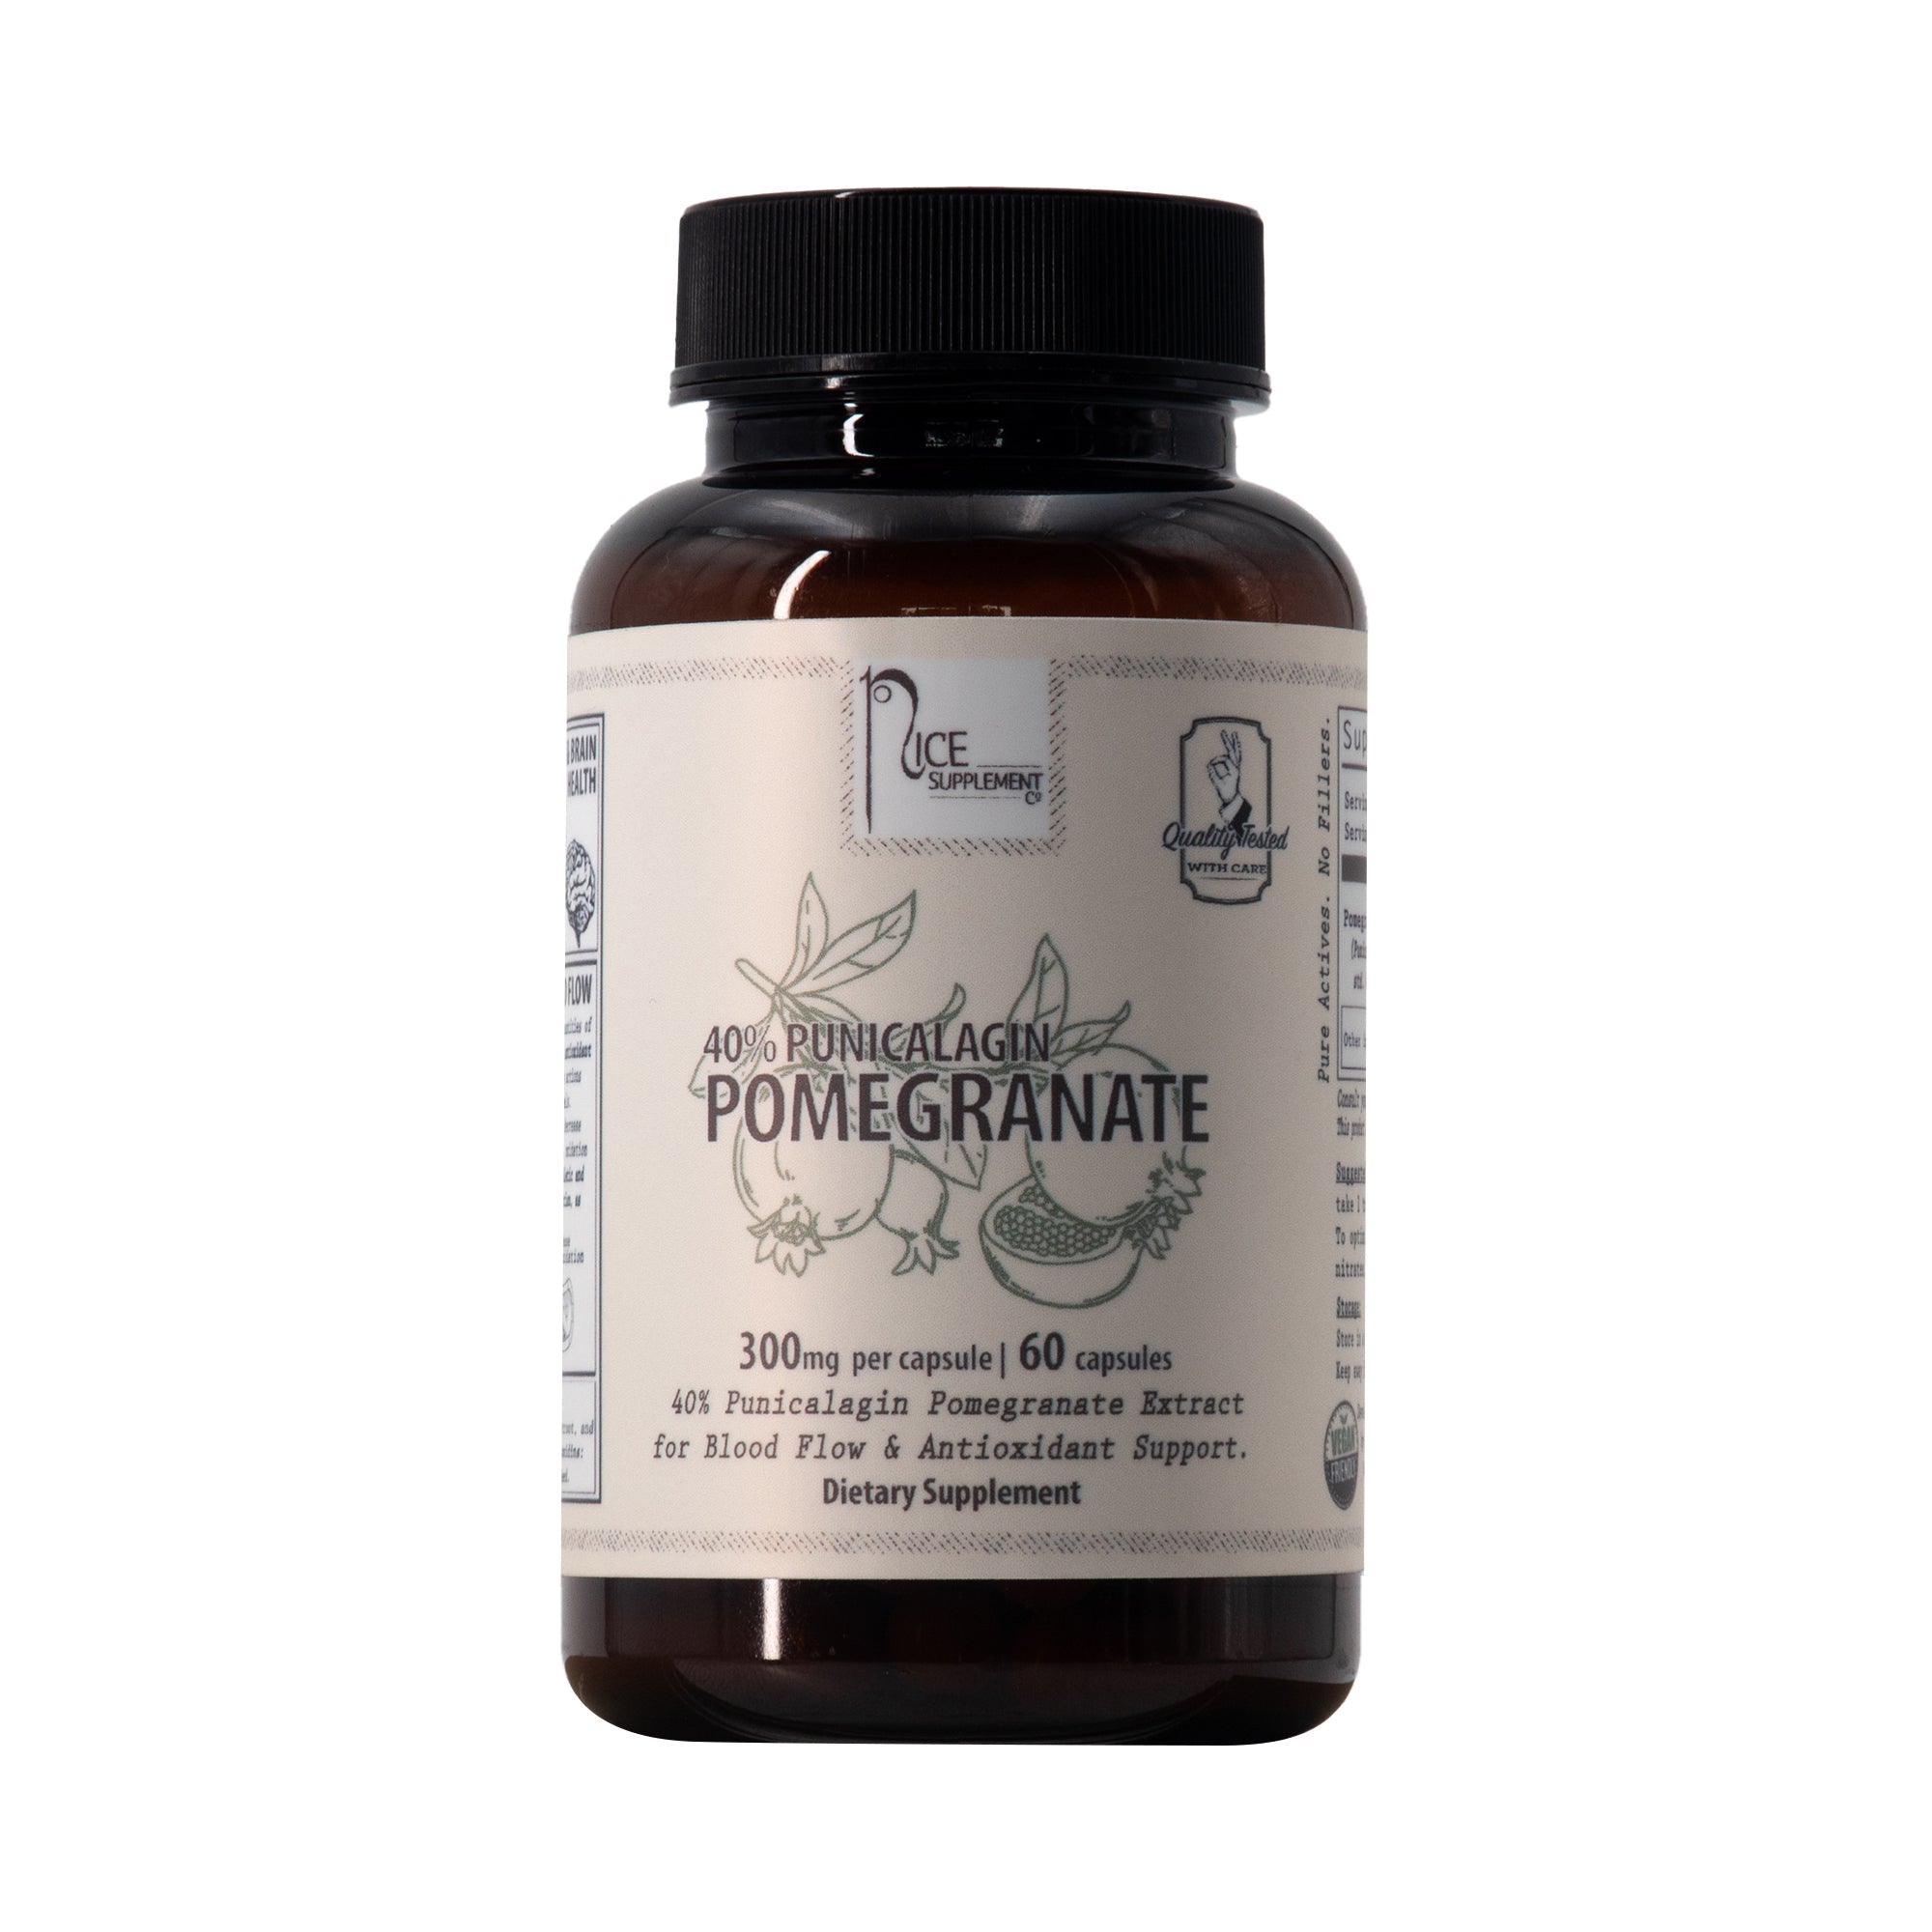 Pomegranate // Blood Flow Support - Nootropic - Strom Sports Nutrition